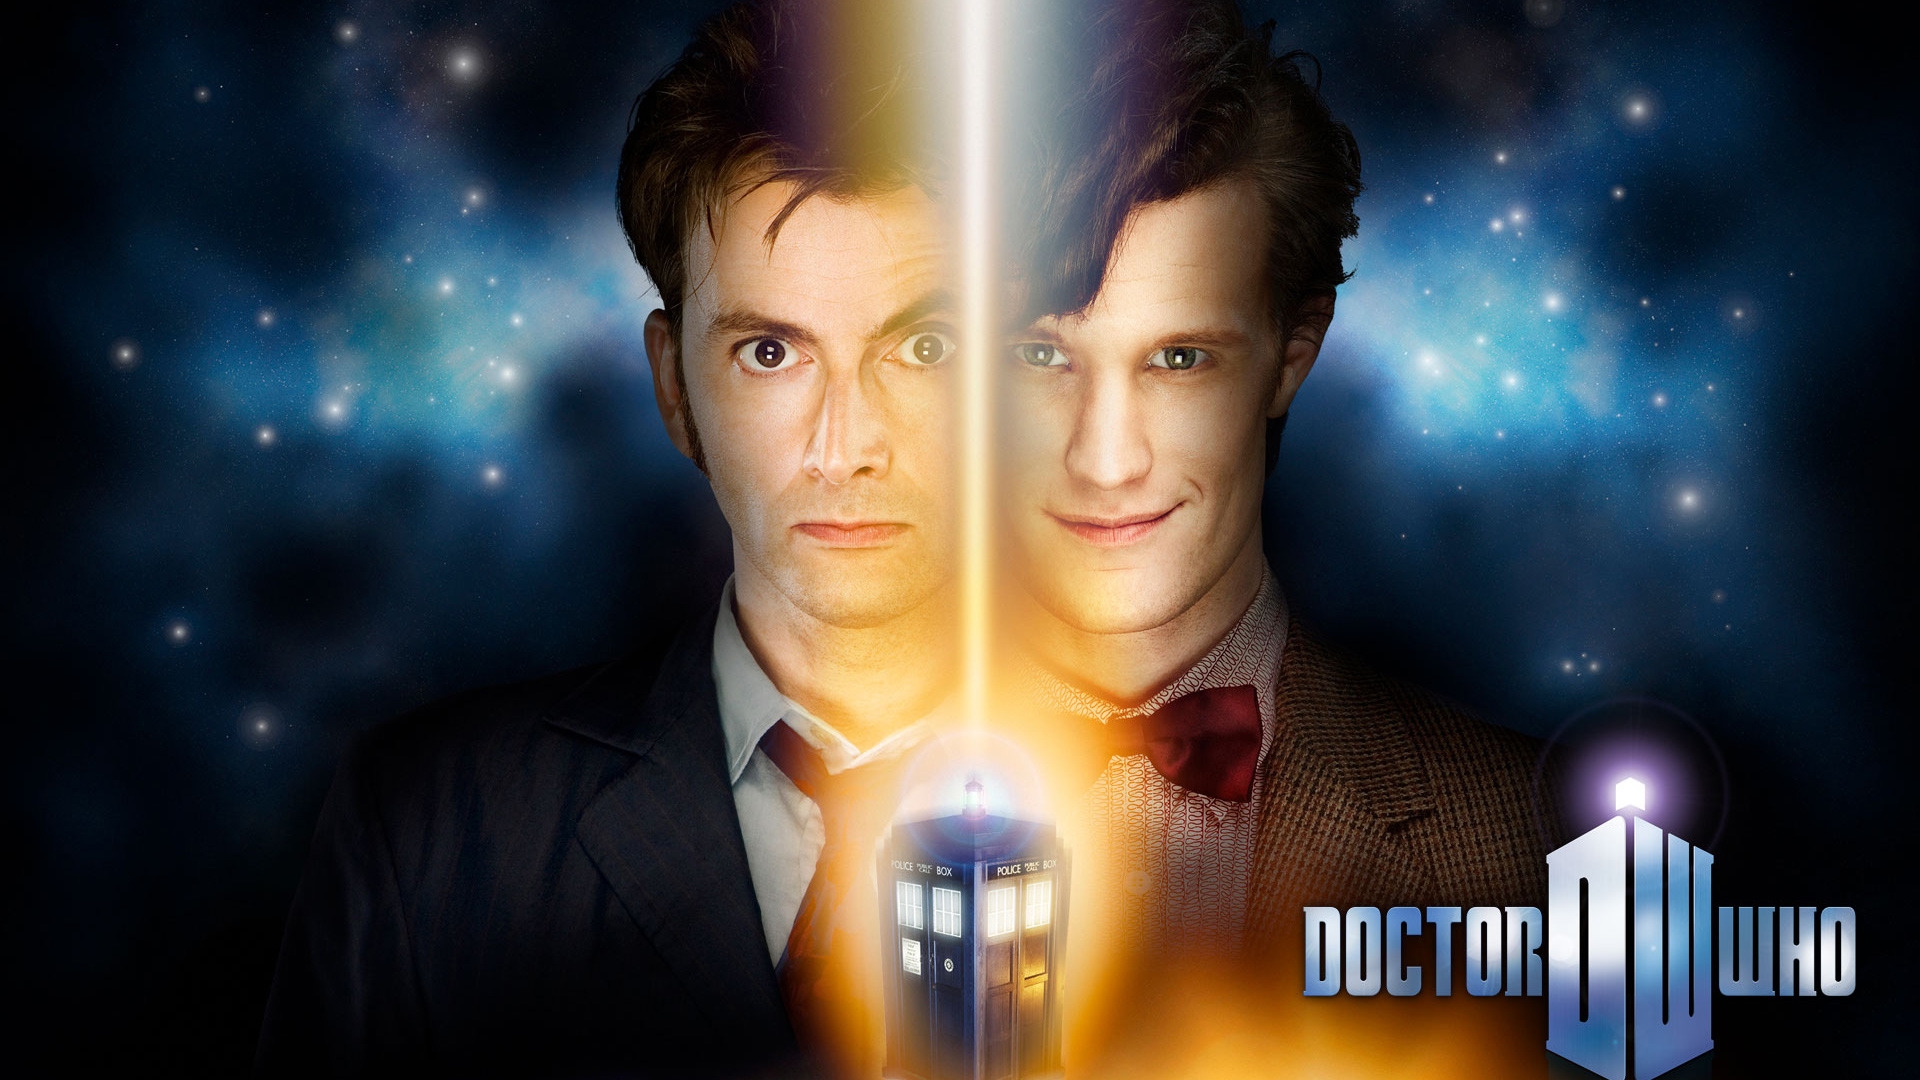 Doctor Who for 1920 x 1080 HDTV 1080p resolution